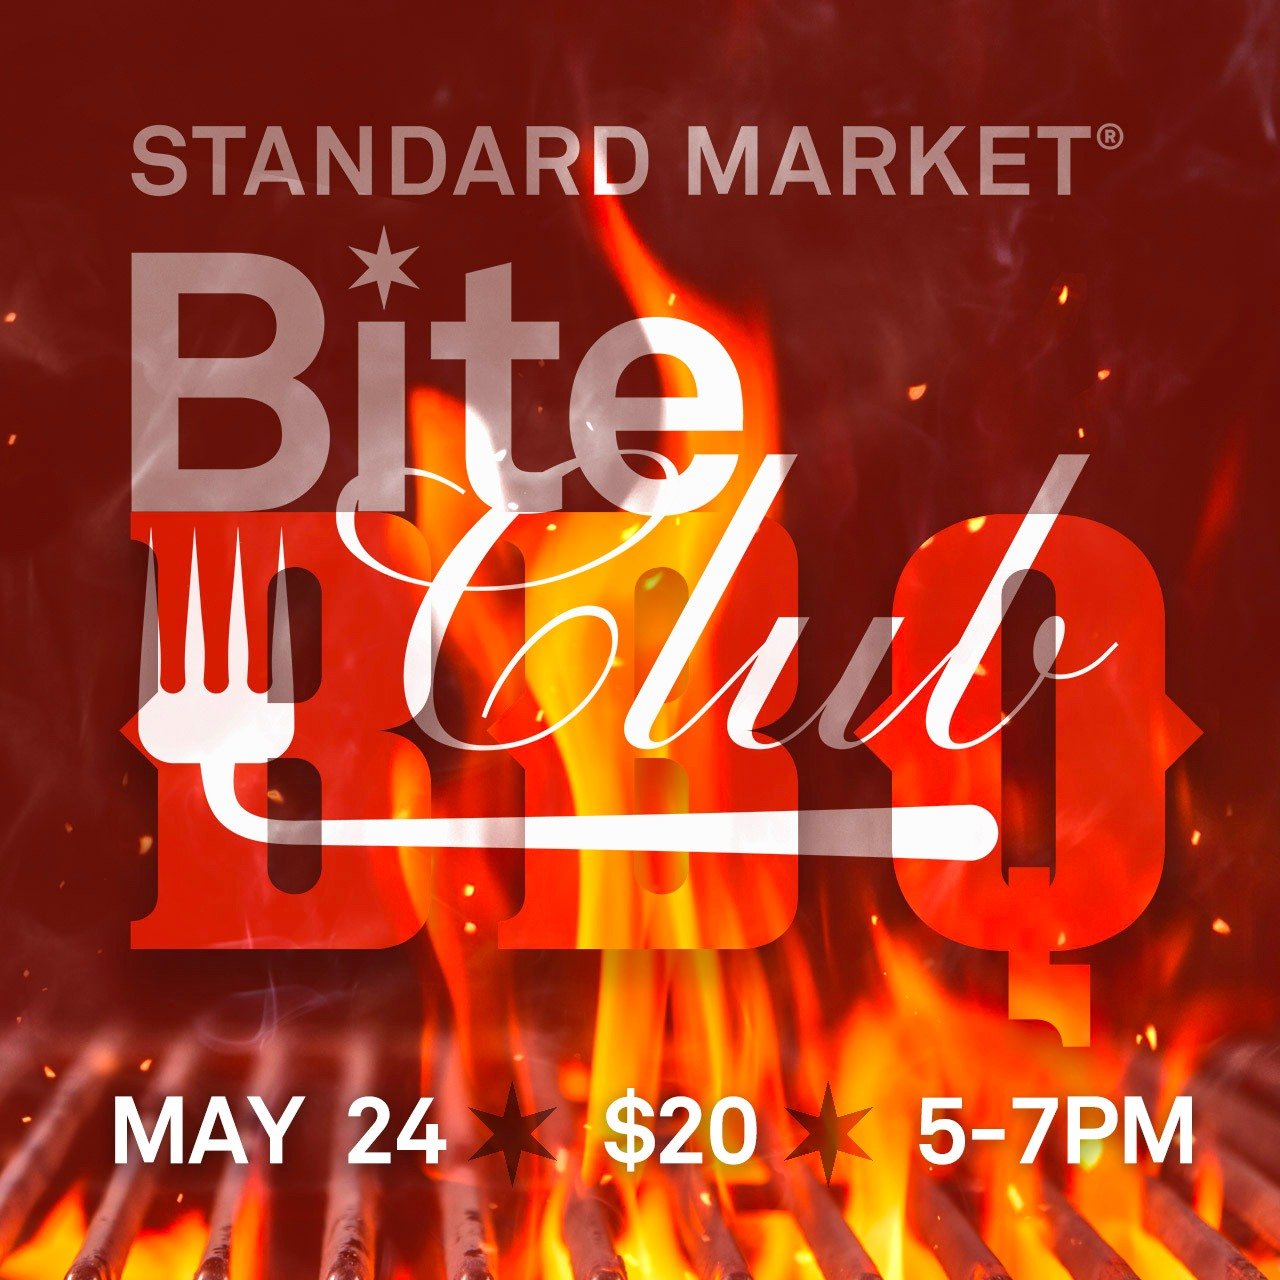 Bite club returns on Friday May 24th!
Join us for our monthly get-together of like-minded individuals who enjoy exciting foods, deliciously paired alcoholic beverages, and good conversation. 

Tickets are $20 and includes 6 tasting bites and 6 alcoho